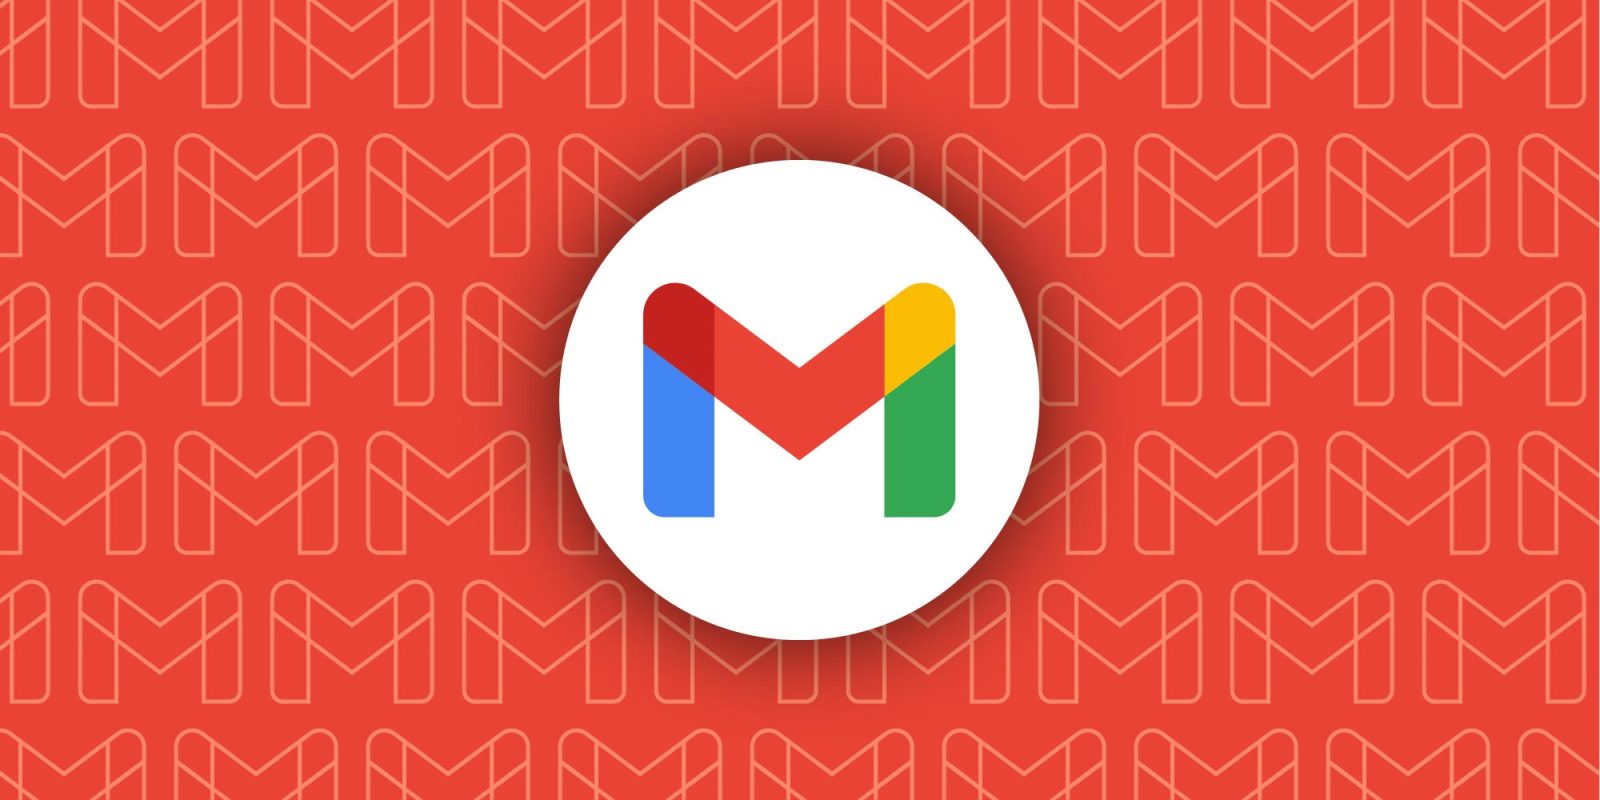 Gmail targets spam by making bulk senders have clear unsubscribe